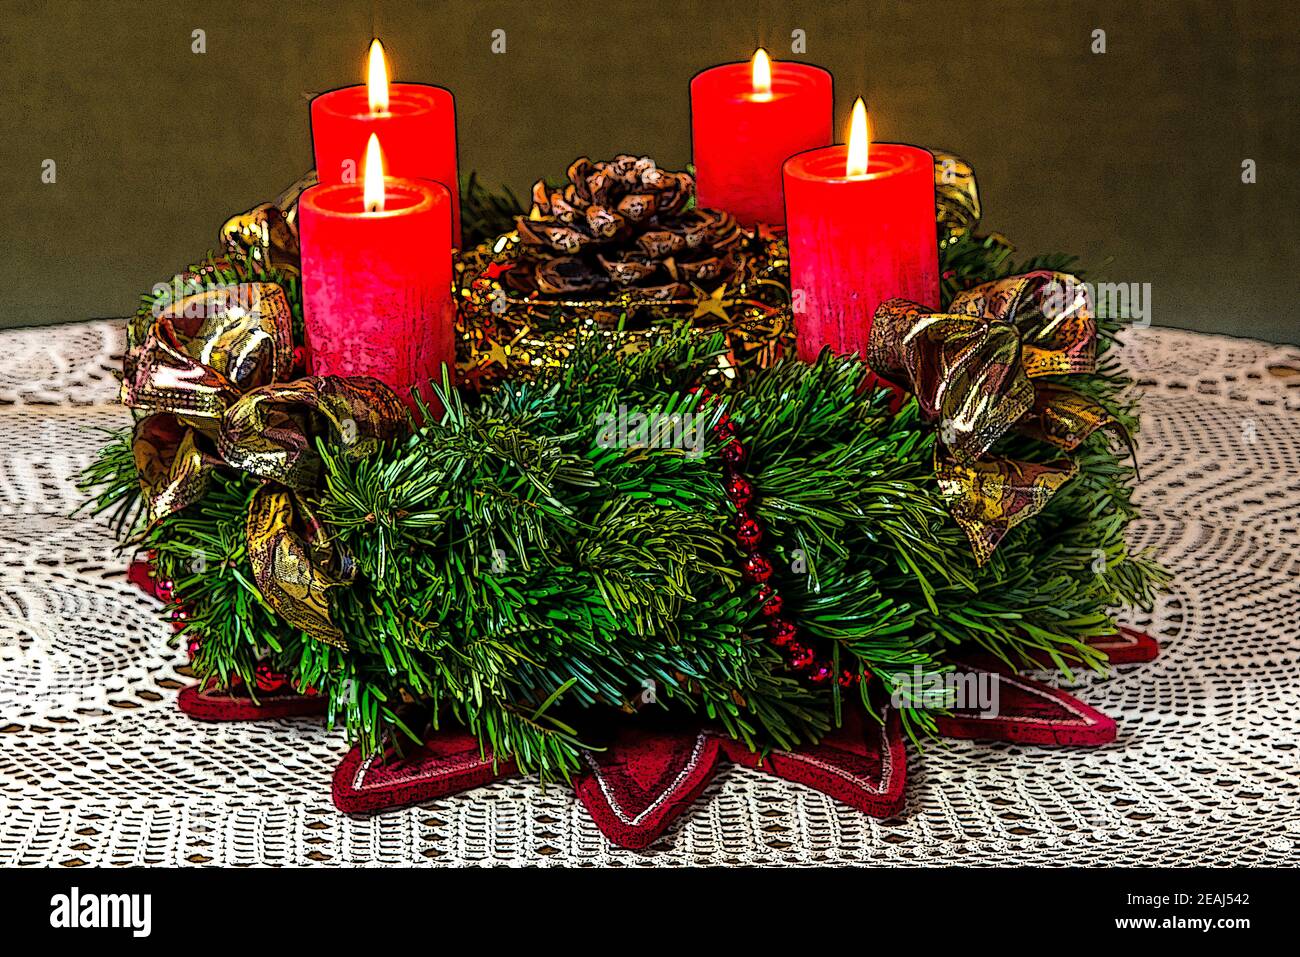 Advent wreath with burning candles Stock Photo